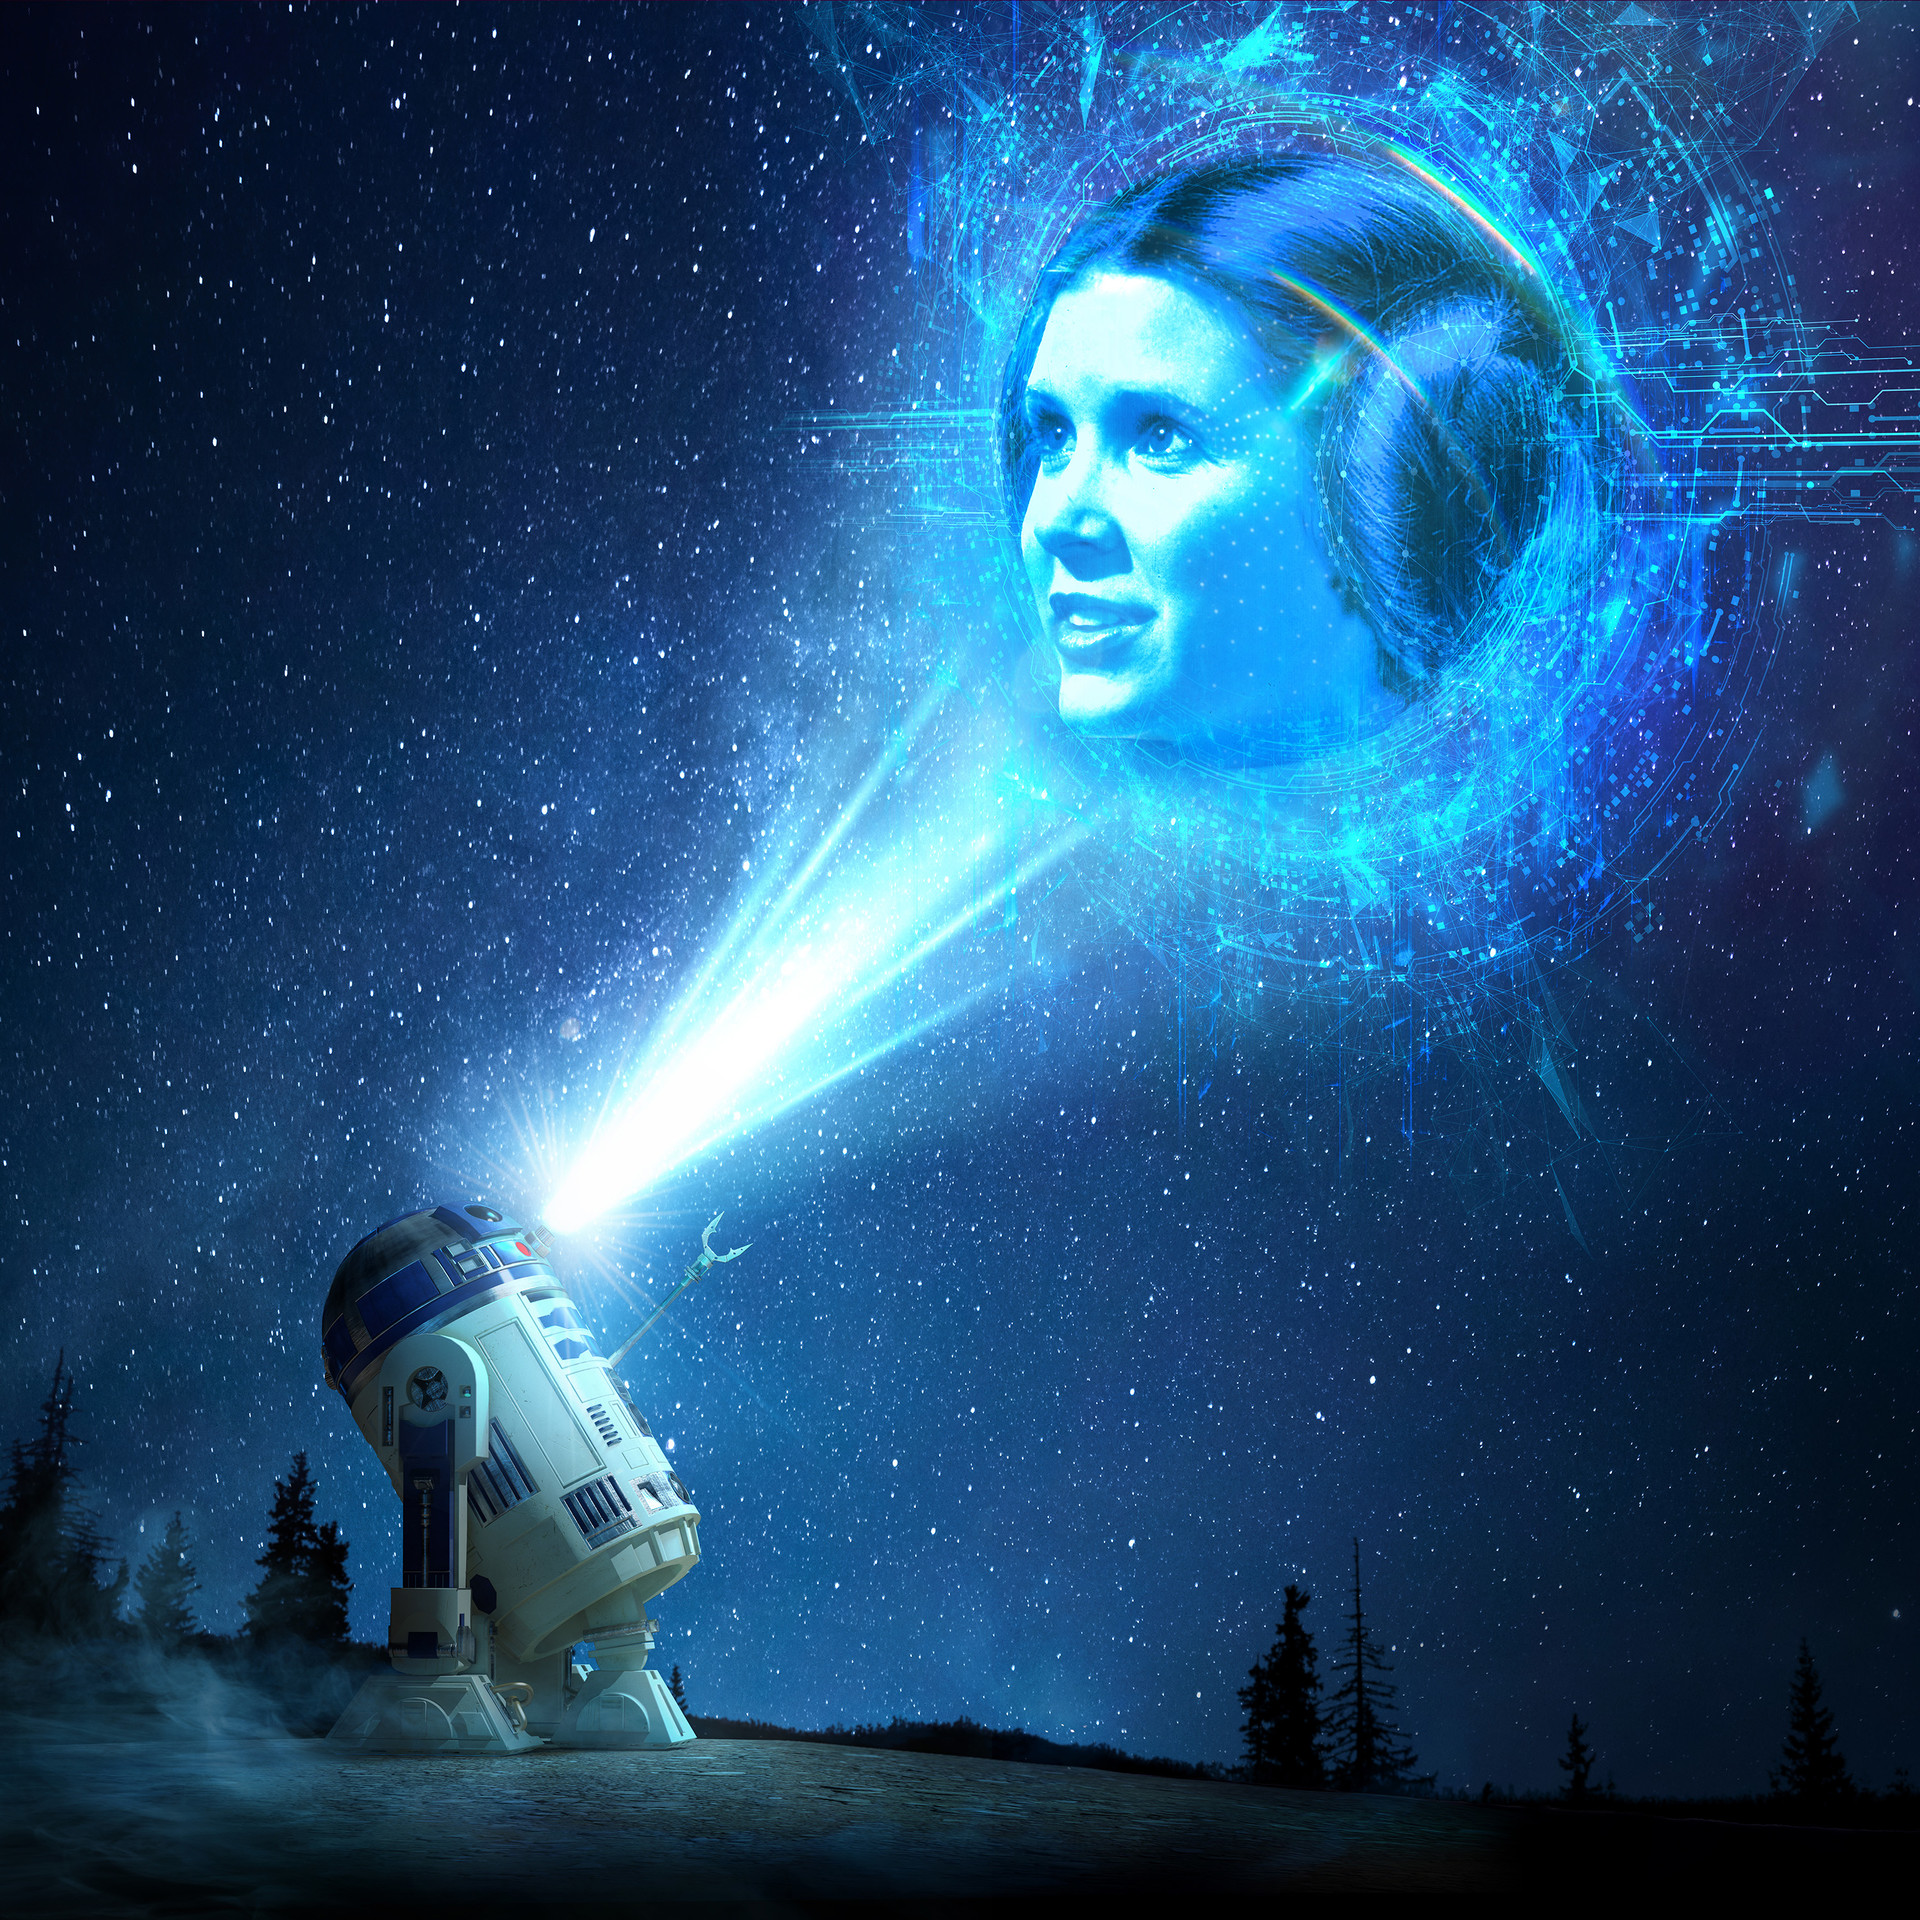 Women Leia Organa R2 D2 Carrie Fisher Science Fiction Digital